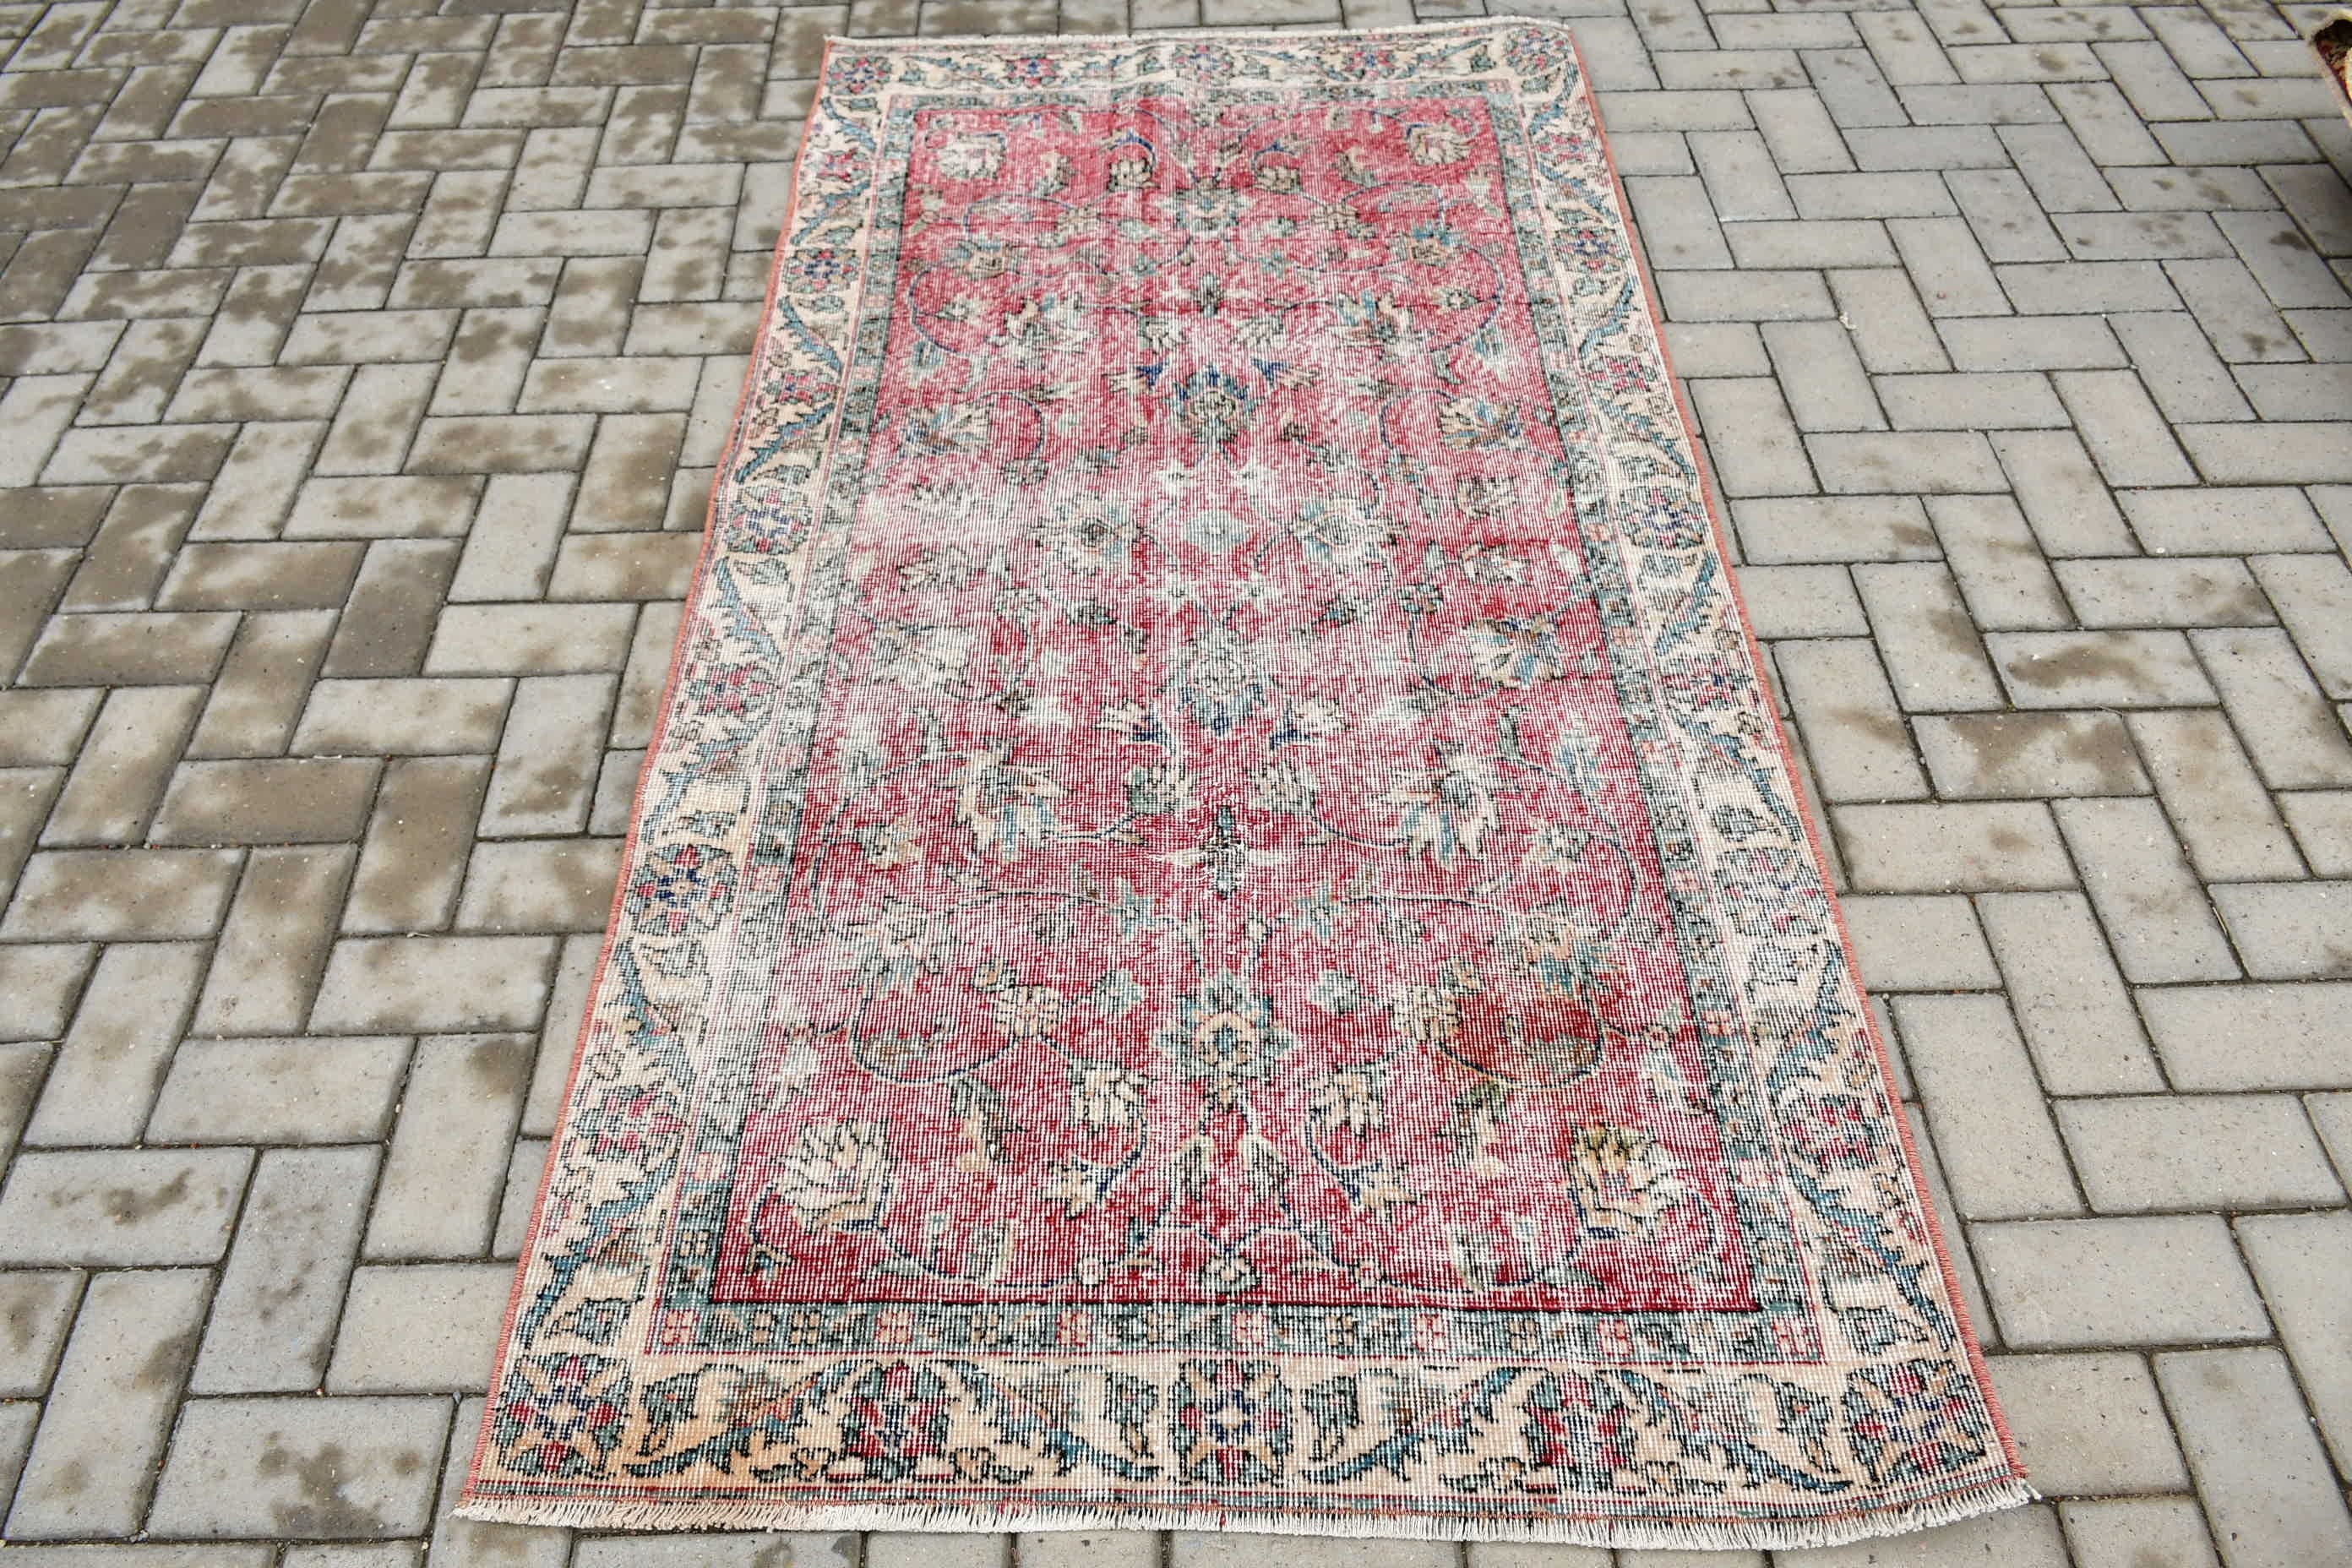 Turkish Rugs, Red Home Decor Rug, Floor Rug, Bedroom Rug, Vintage Rugs, Antique Rugs, 3.4x6.5 ft Accent Rug, Entry Rug